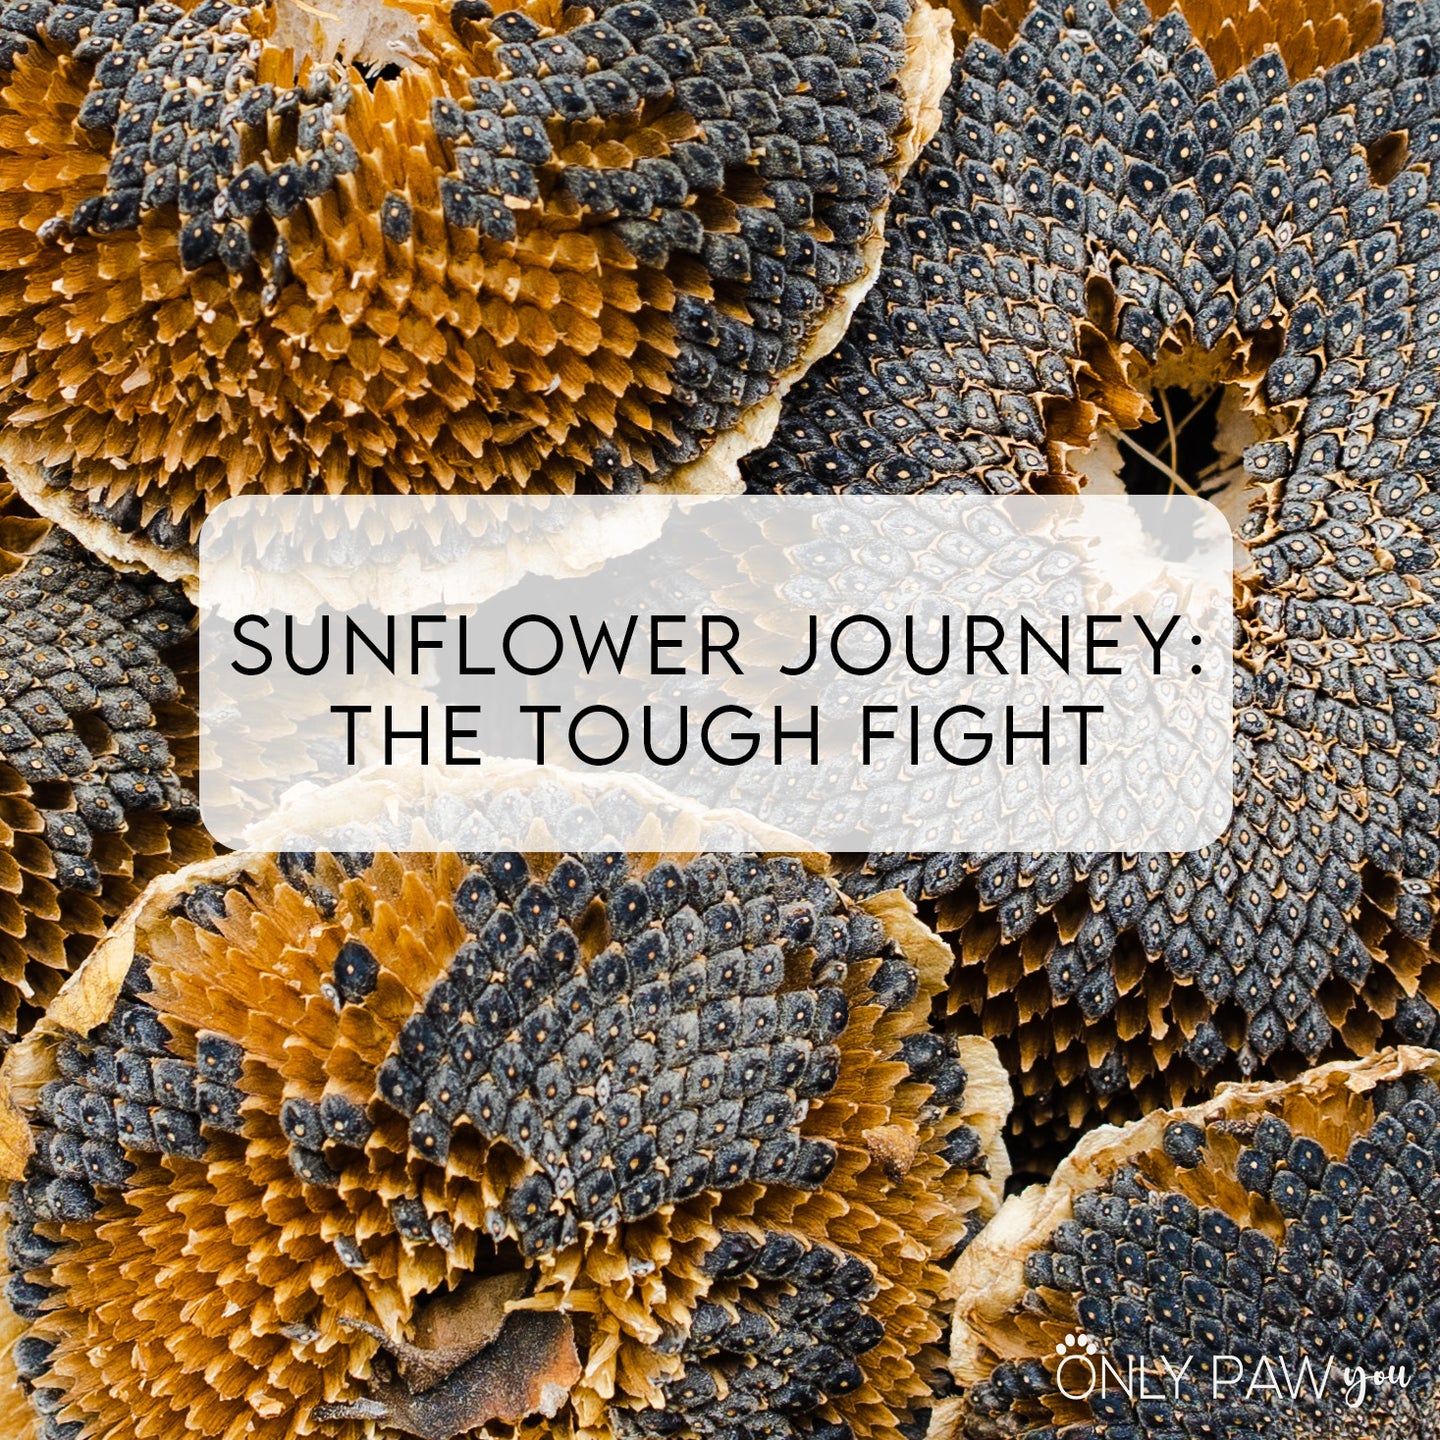 [AS-IS] Sunflower Journey: The Tough Fight